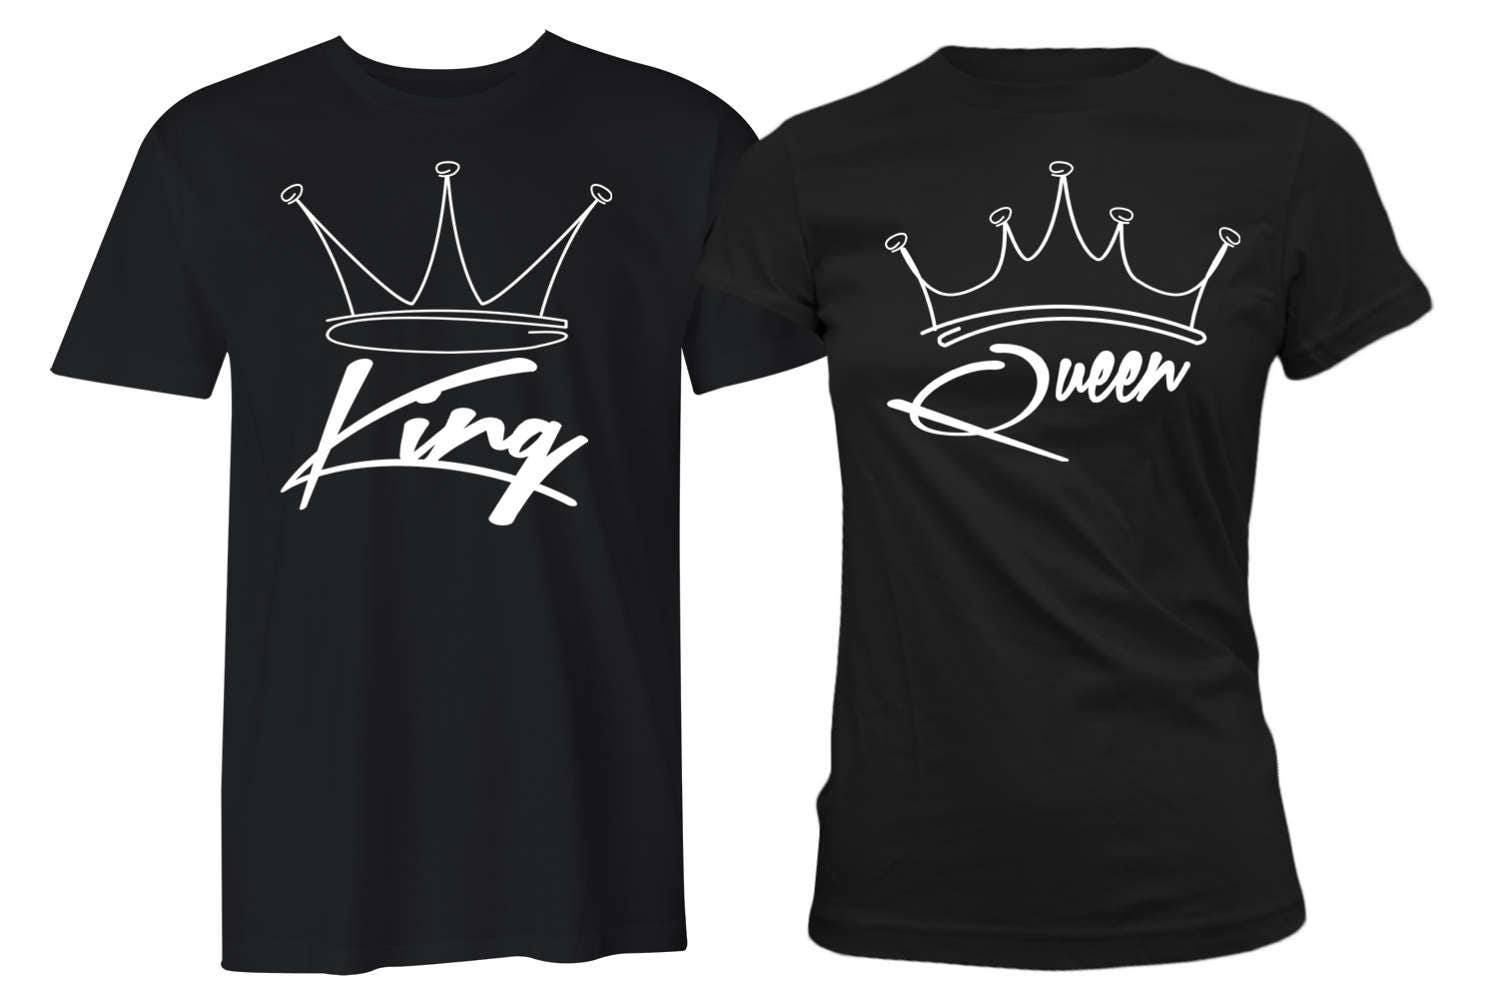 king and queen t shirts uk